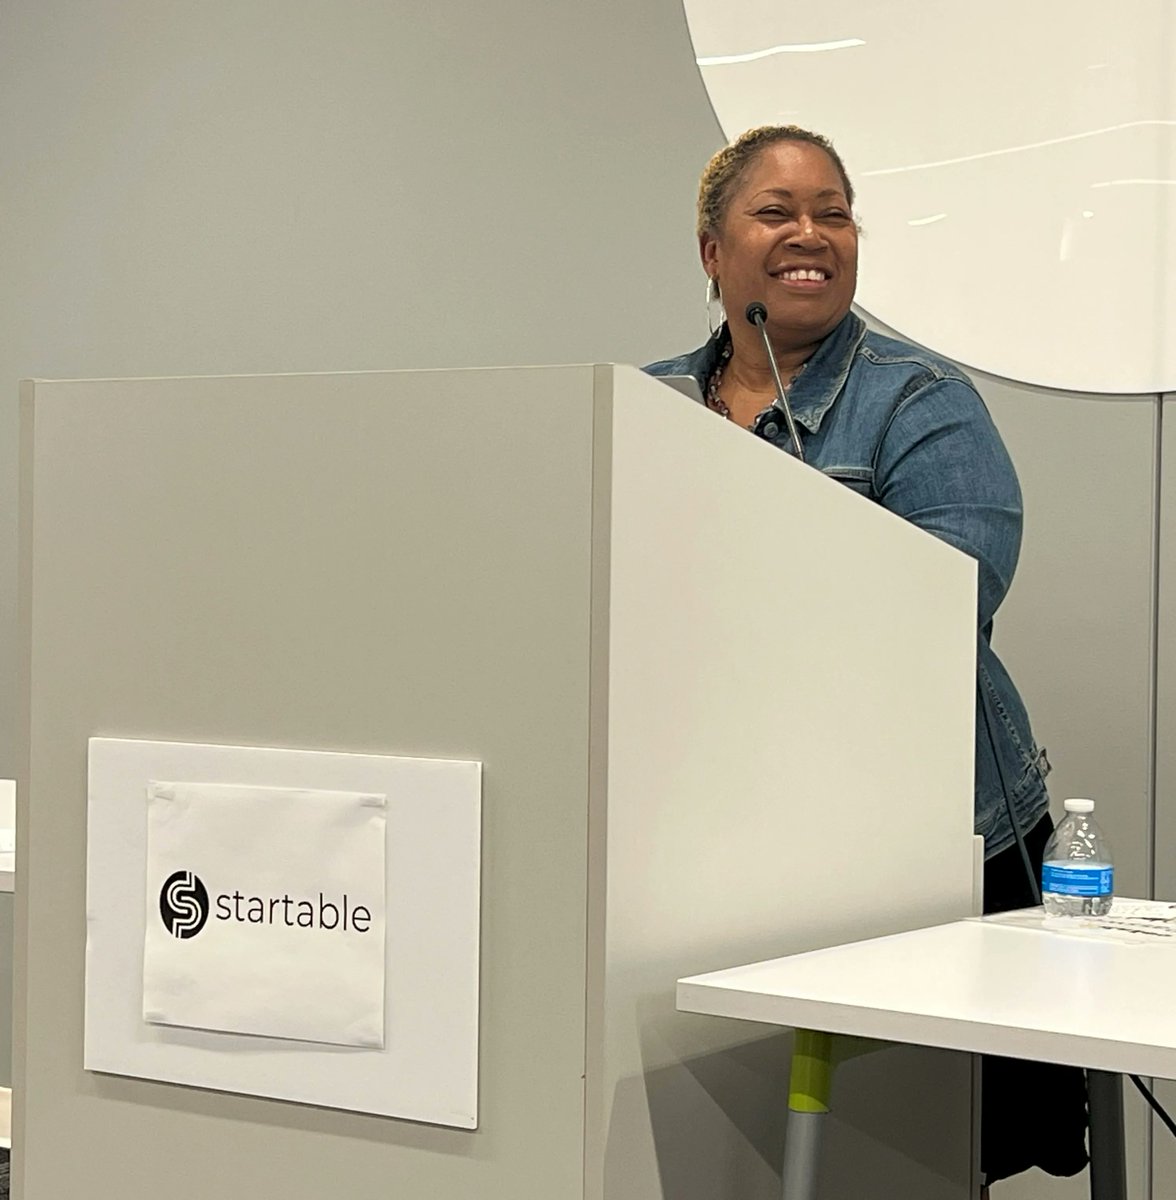 Congratulations to our students who competed in the Spring 2023 Startable Pitch Competition! Student teams representing Environmental Charter School, Northgate High School, Team Humanity, & Penn Hills Entrepreneurship Charter School competed for over $8000 in prizes.